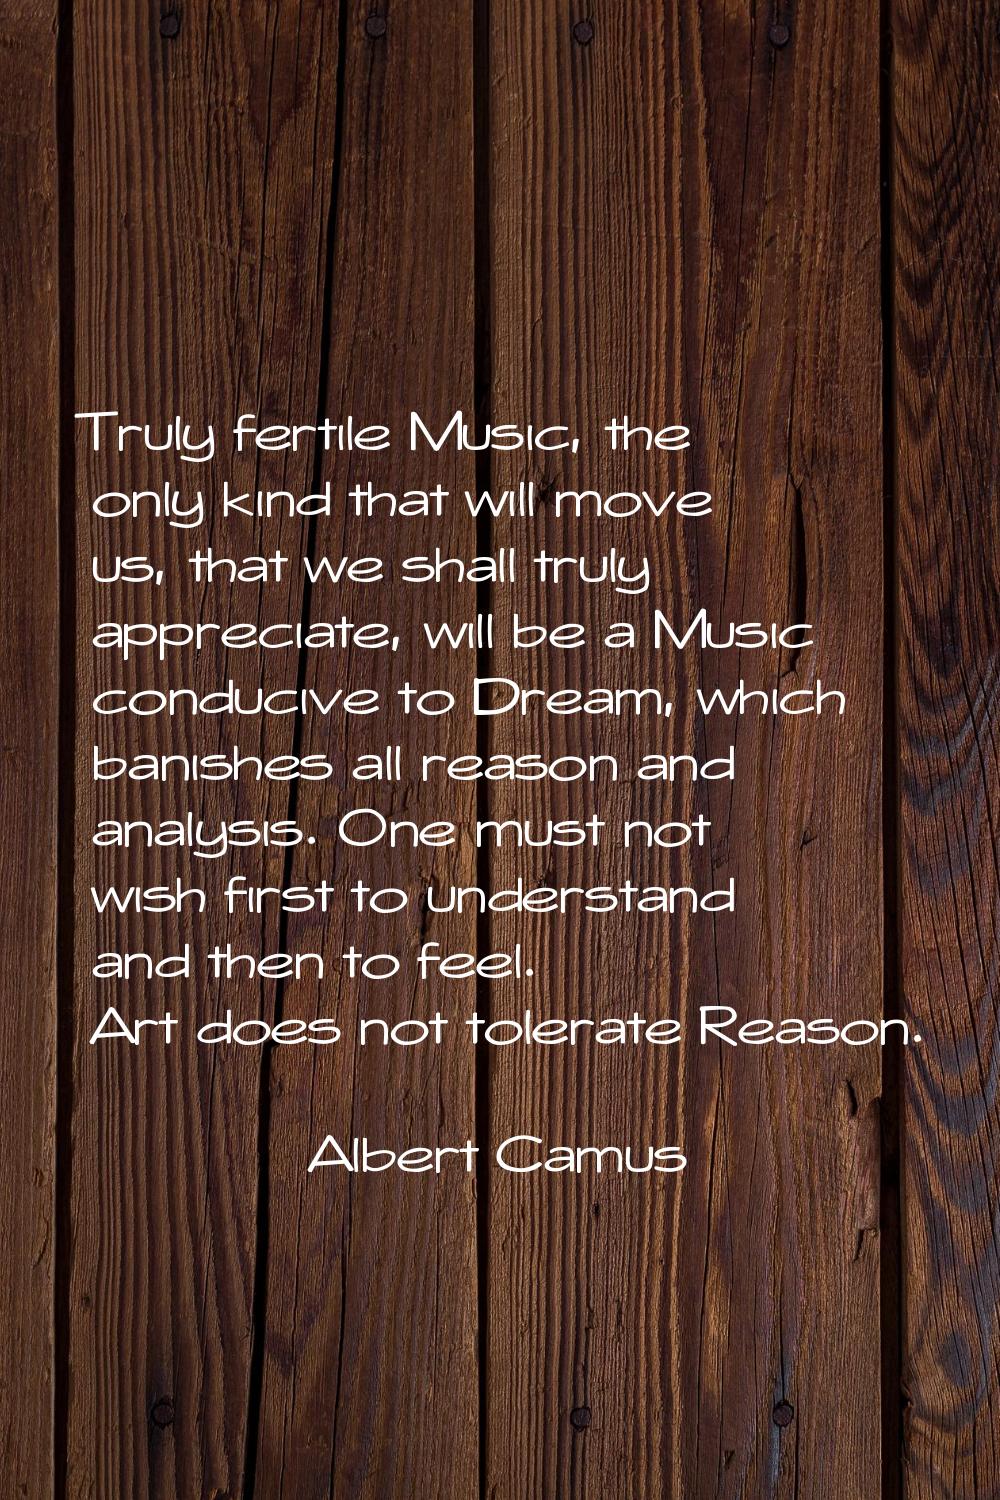 Truly fertile Music, the only kind that will move us, that we shall truly appreciate, will be a Mus